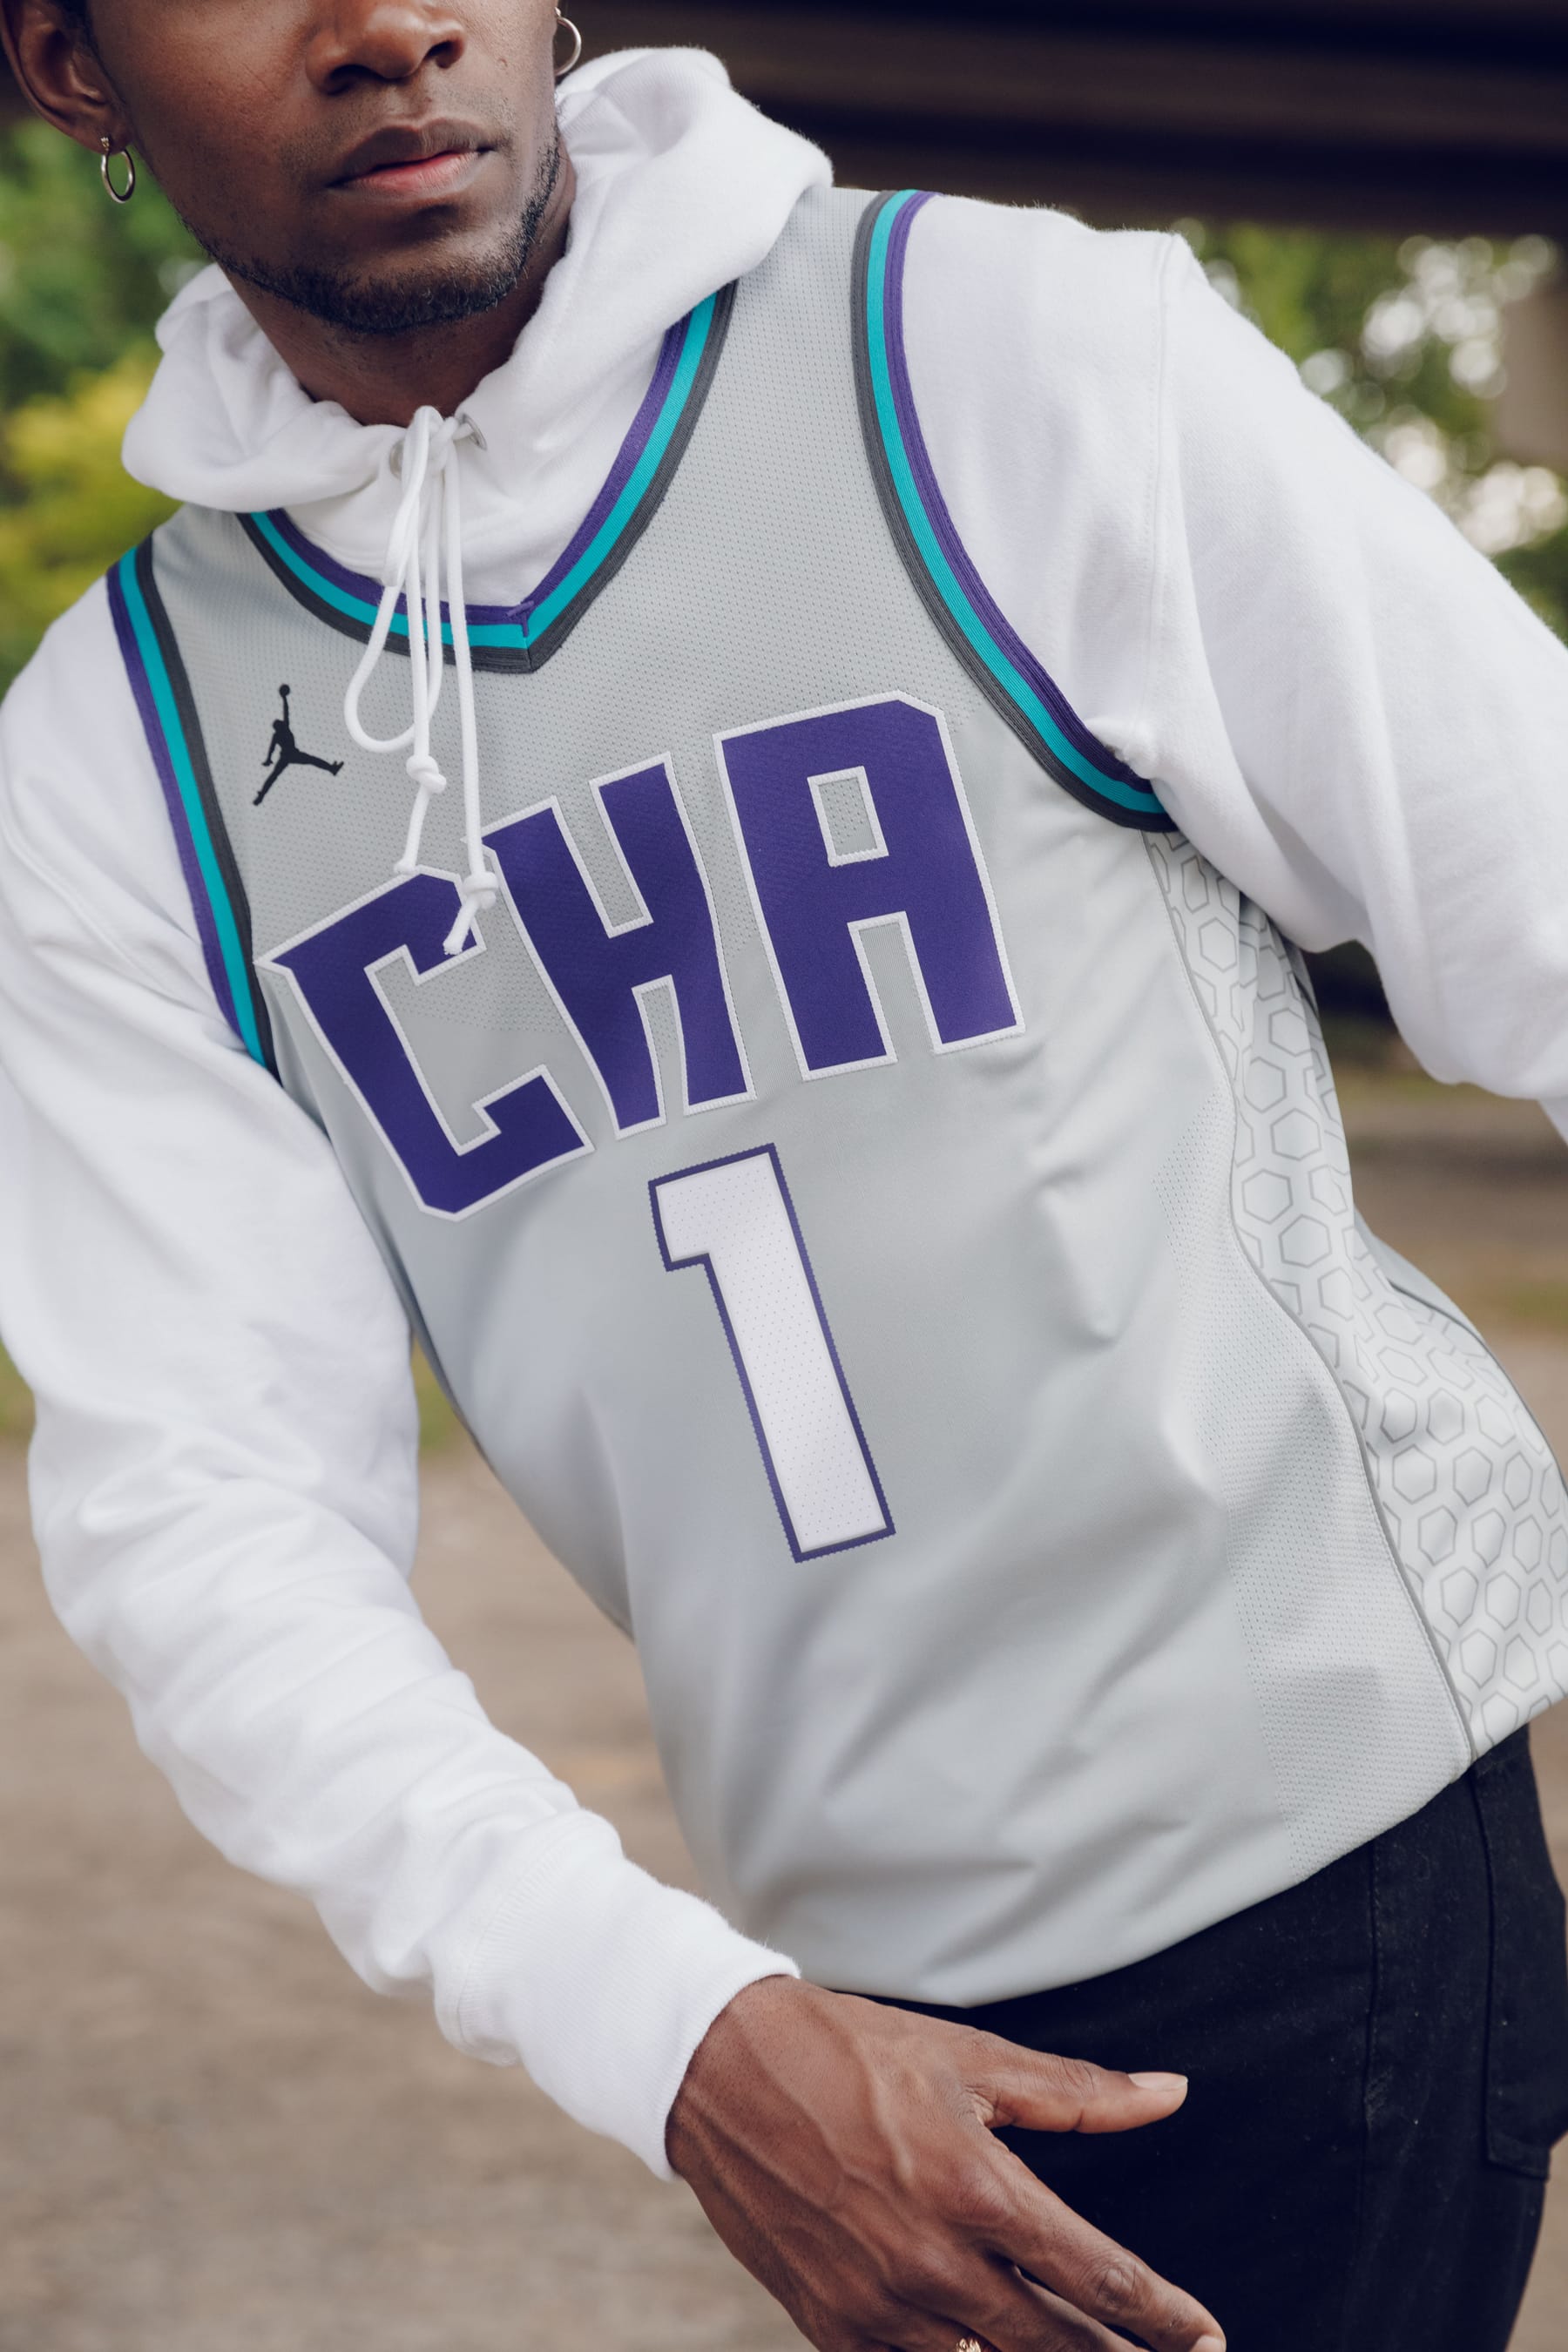 basketball jersey and hoodie